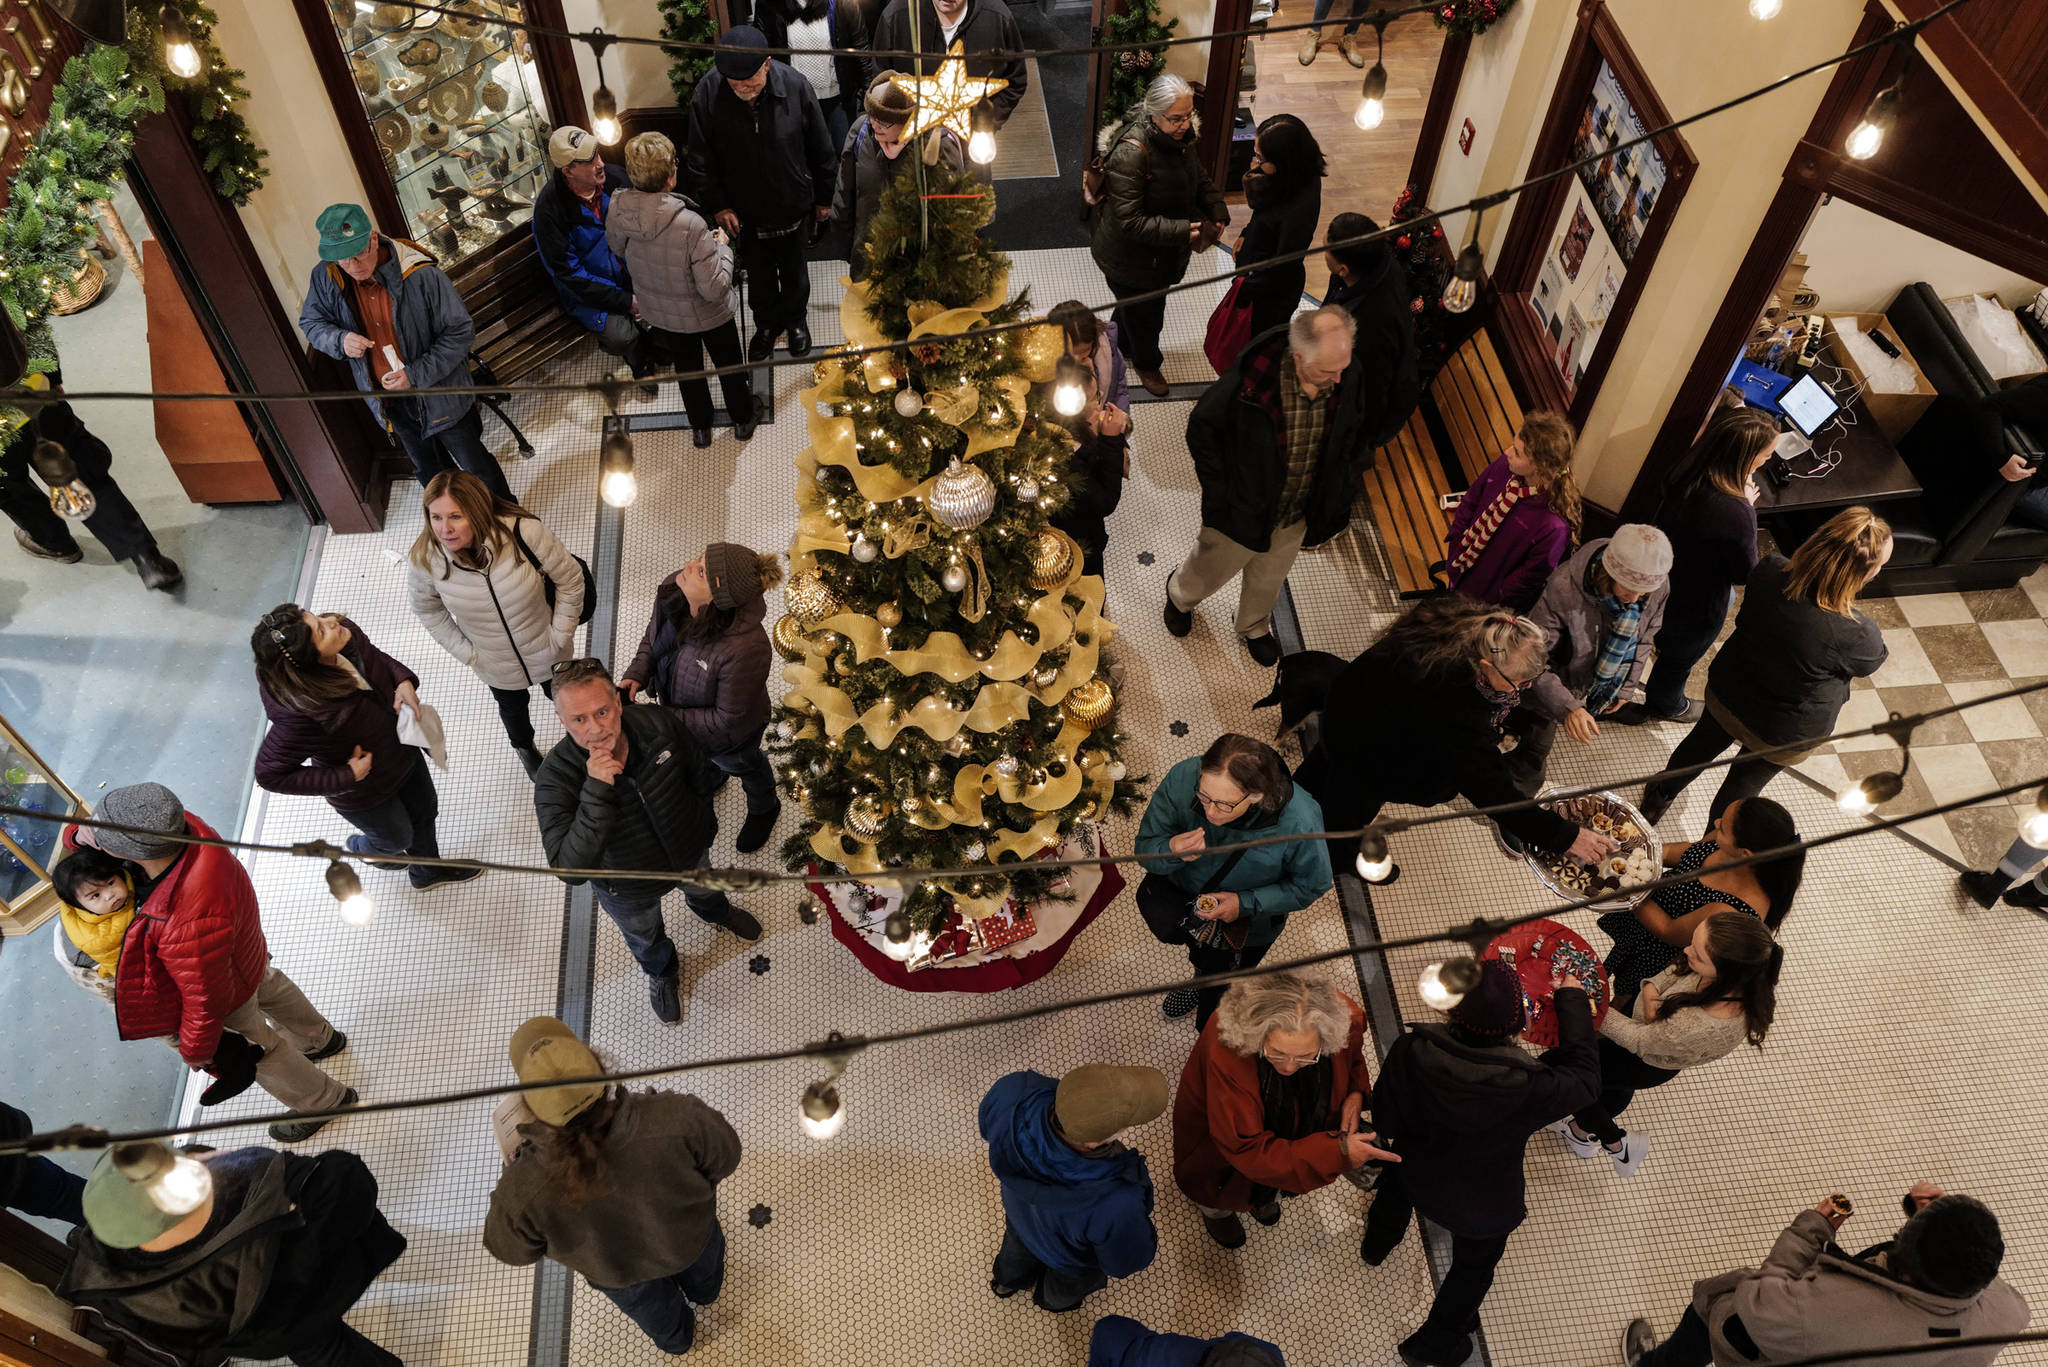 Resident fill the main floor of the Senate Building during Gallery Walk on Friday, Dec. 6, 2019. (Michael Penn | Juneau Empire)